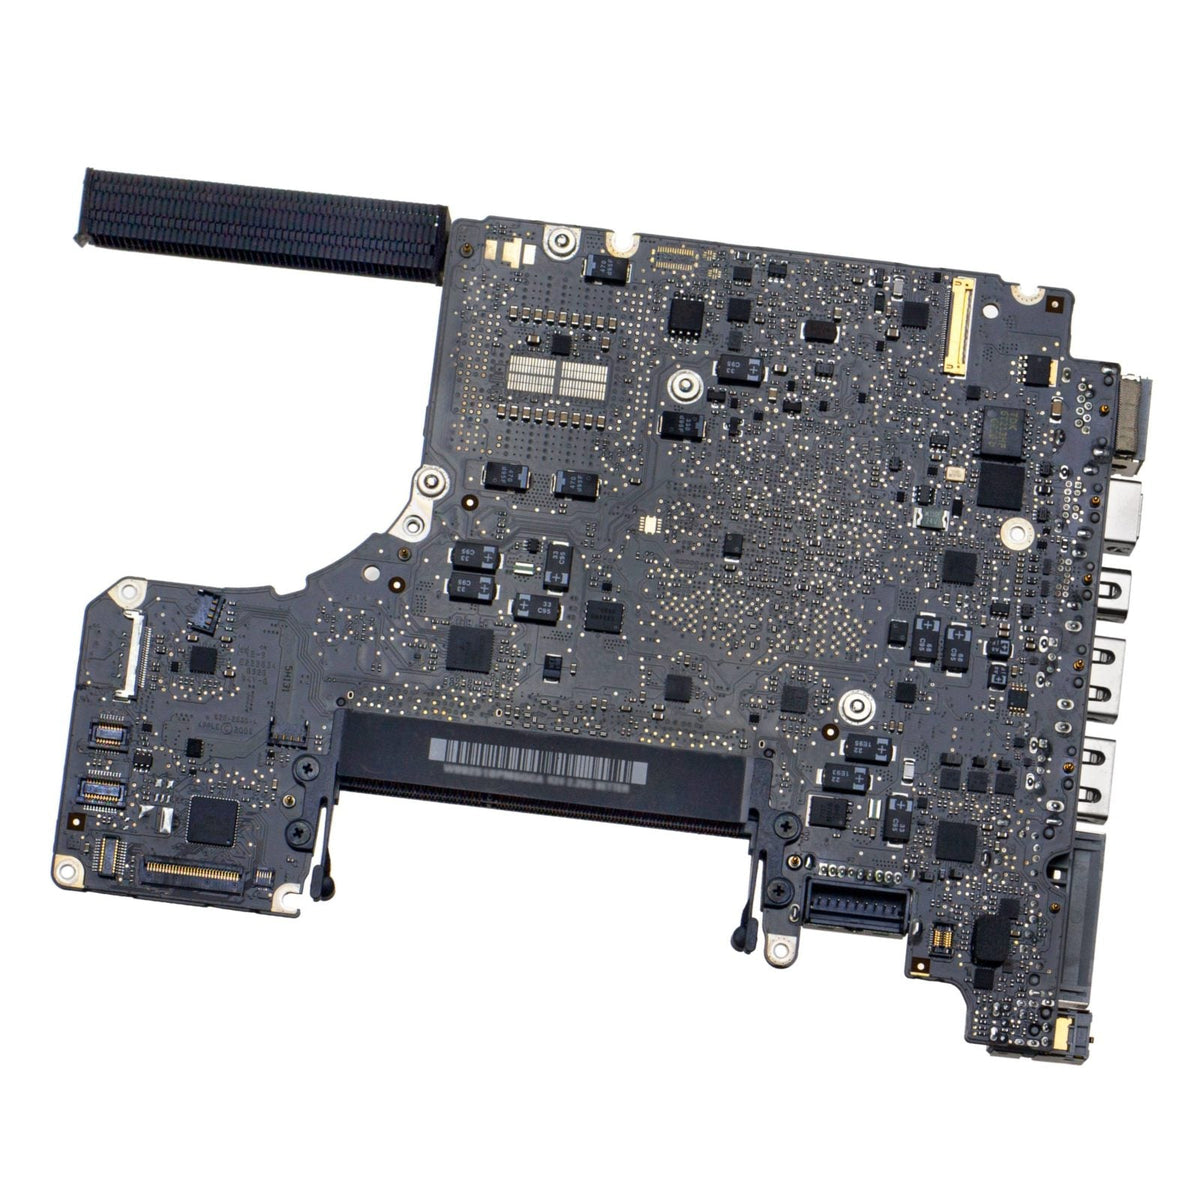 MOTHERBOARD FOR MACBOOK PRO 13" A1278 (MID 2009)